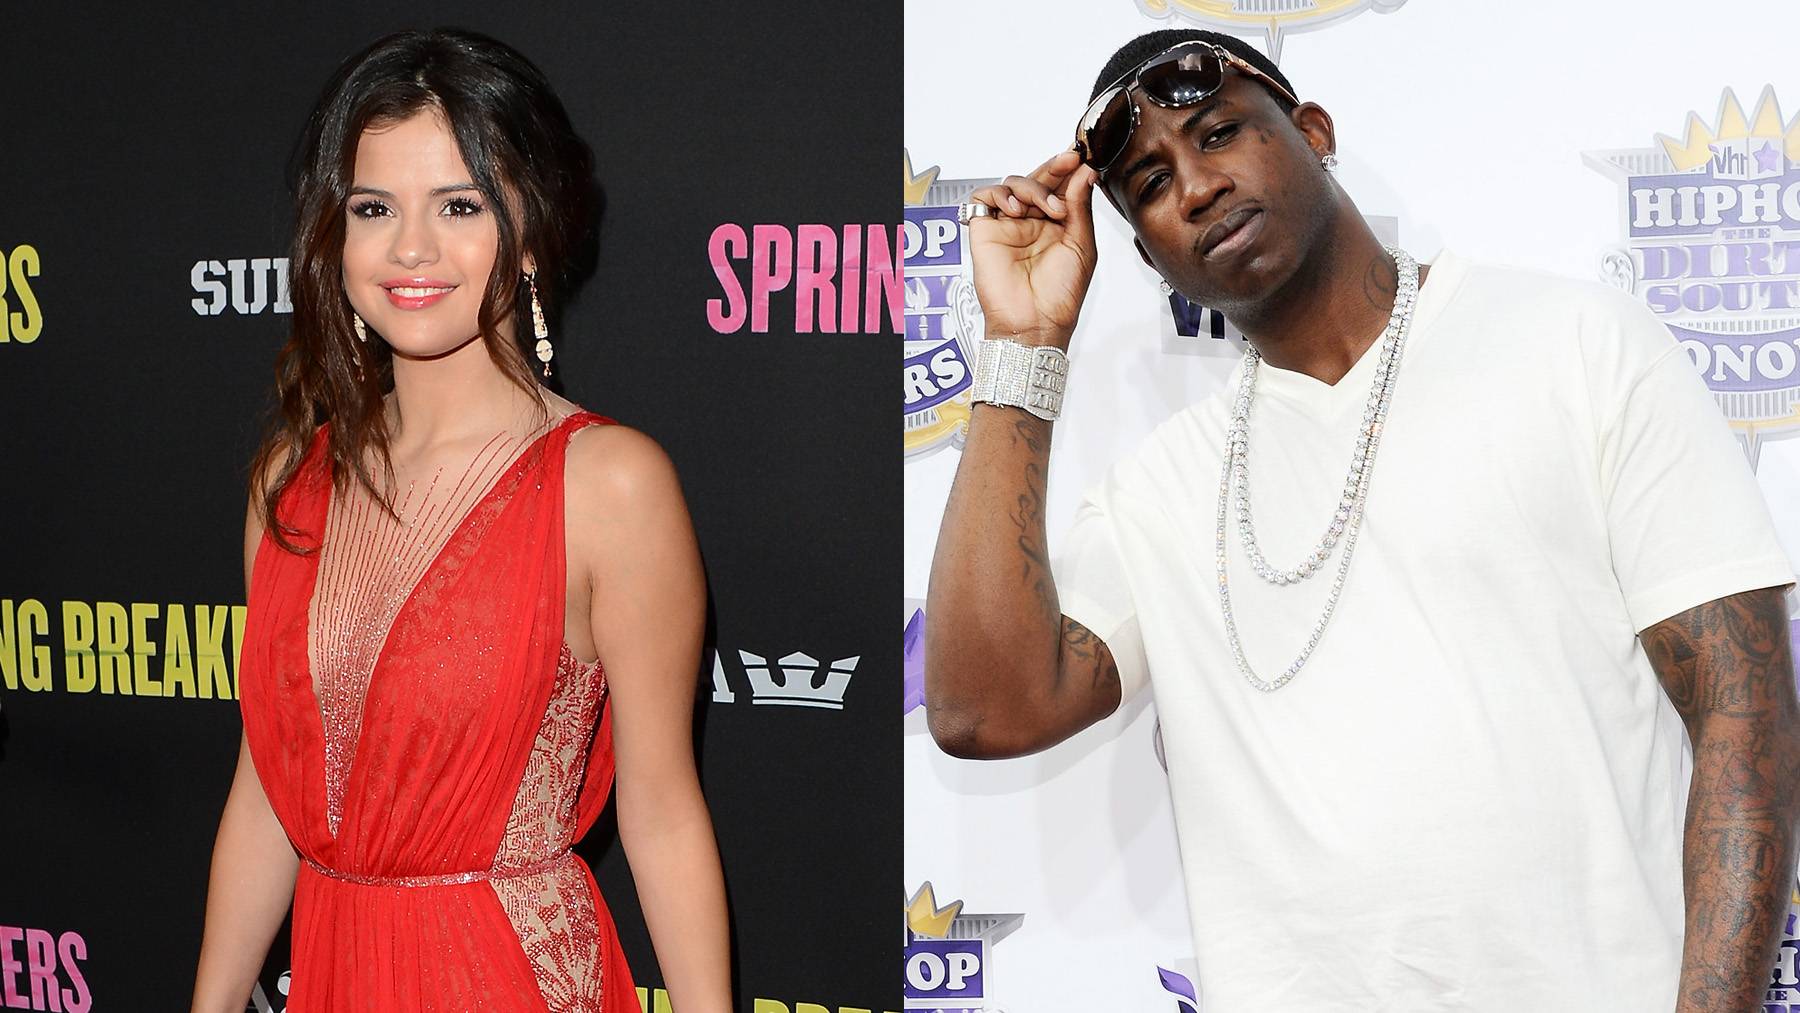 Gucci Mane and Selena - Image 12 from The Wildest Relationship